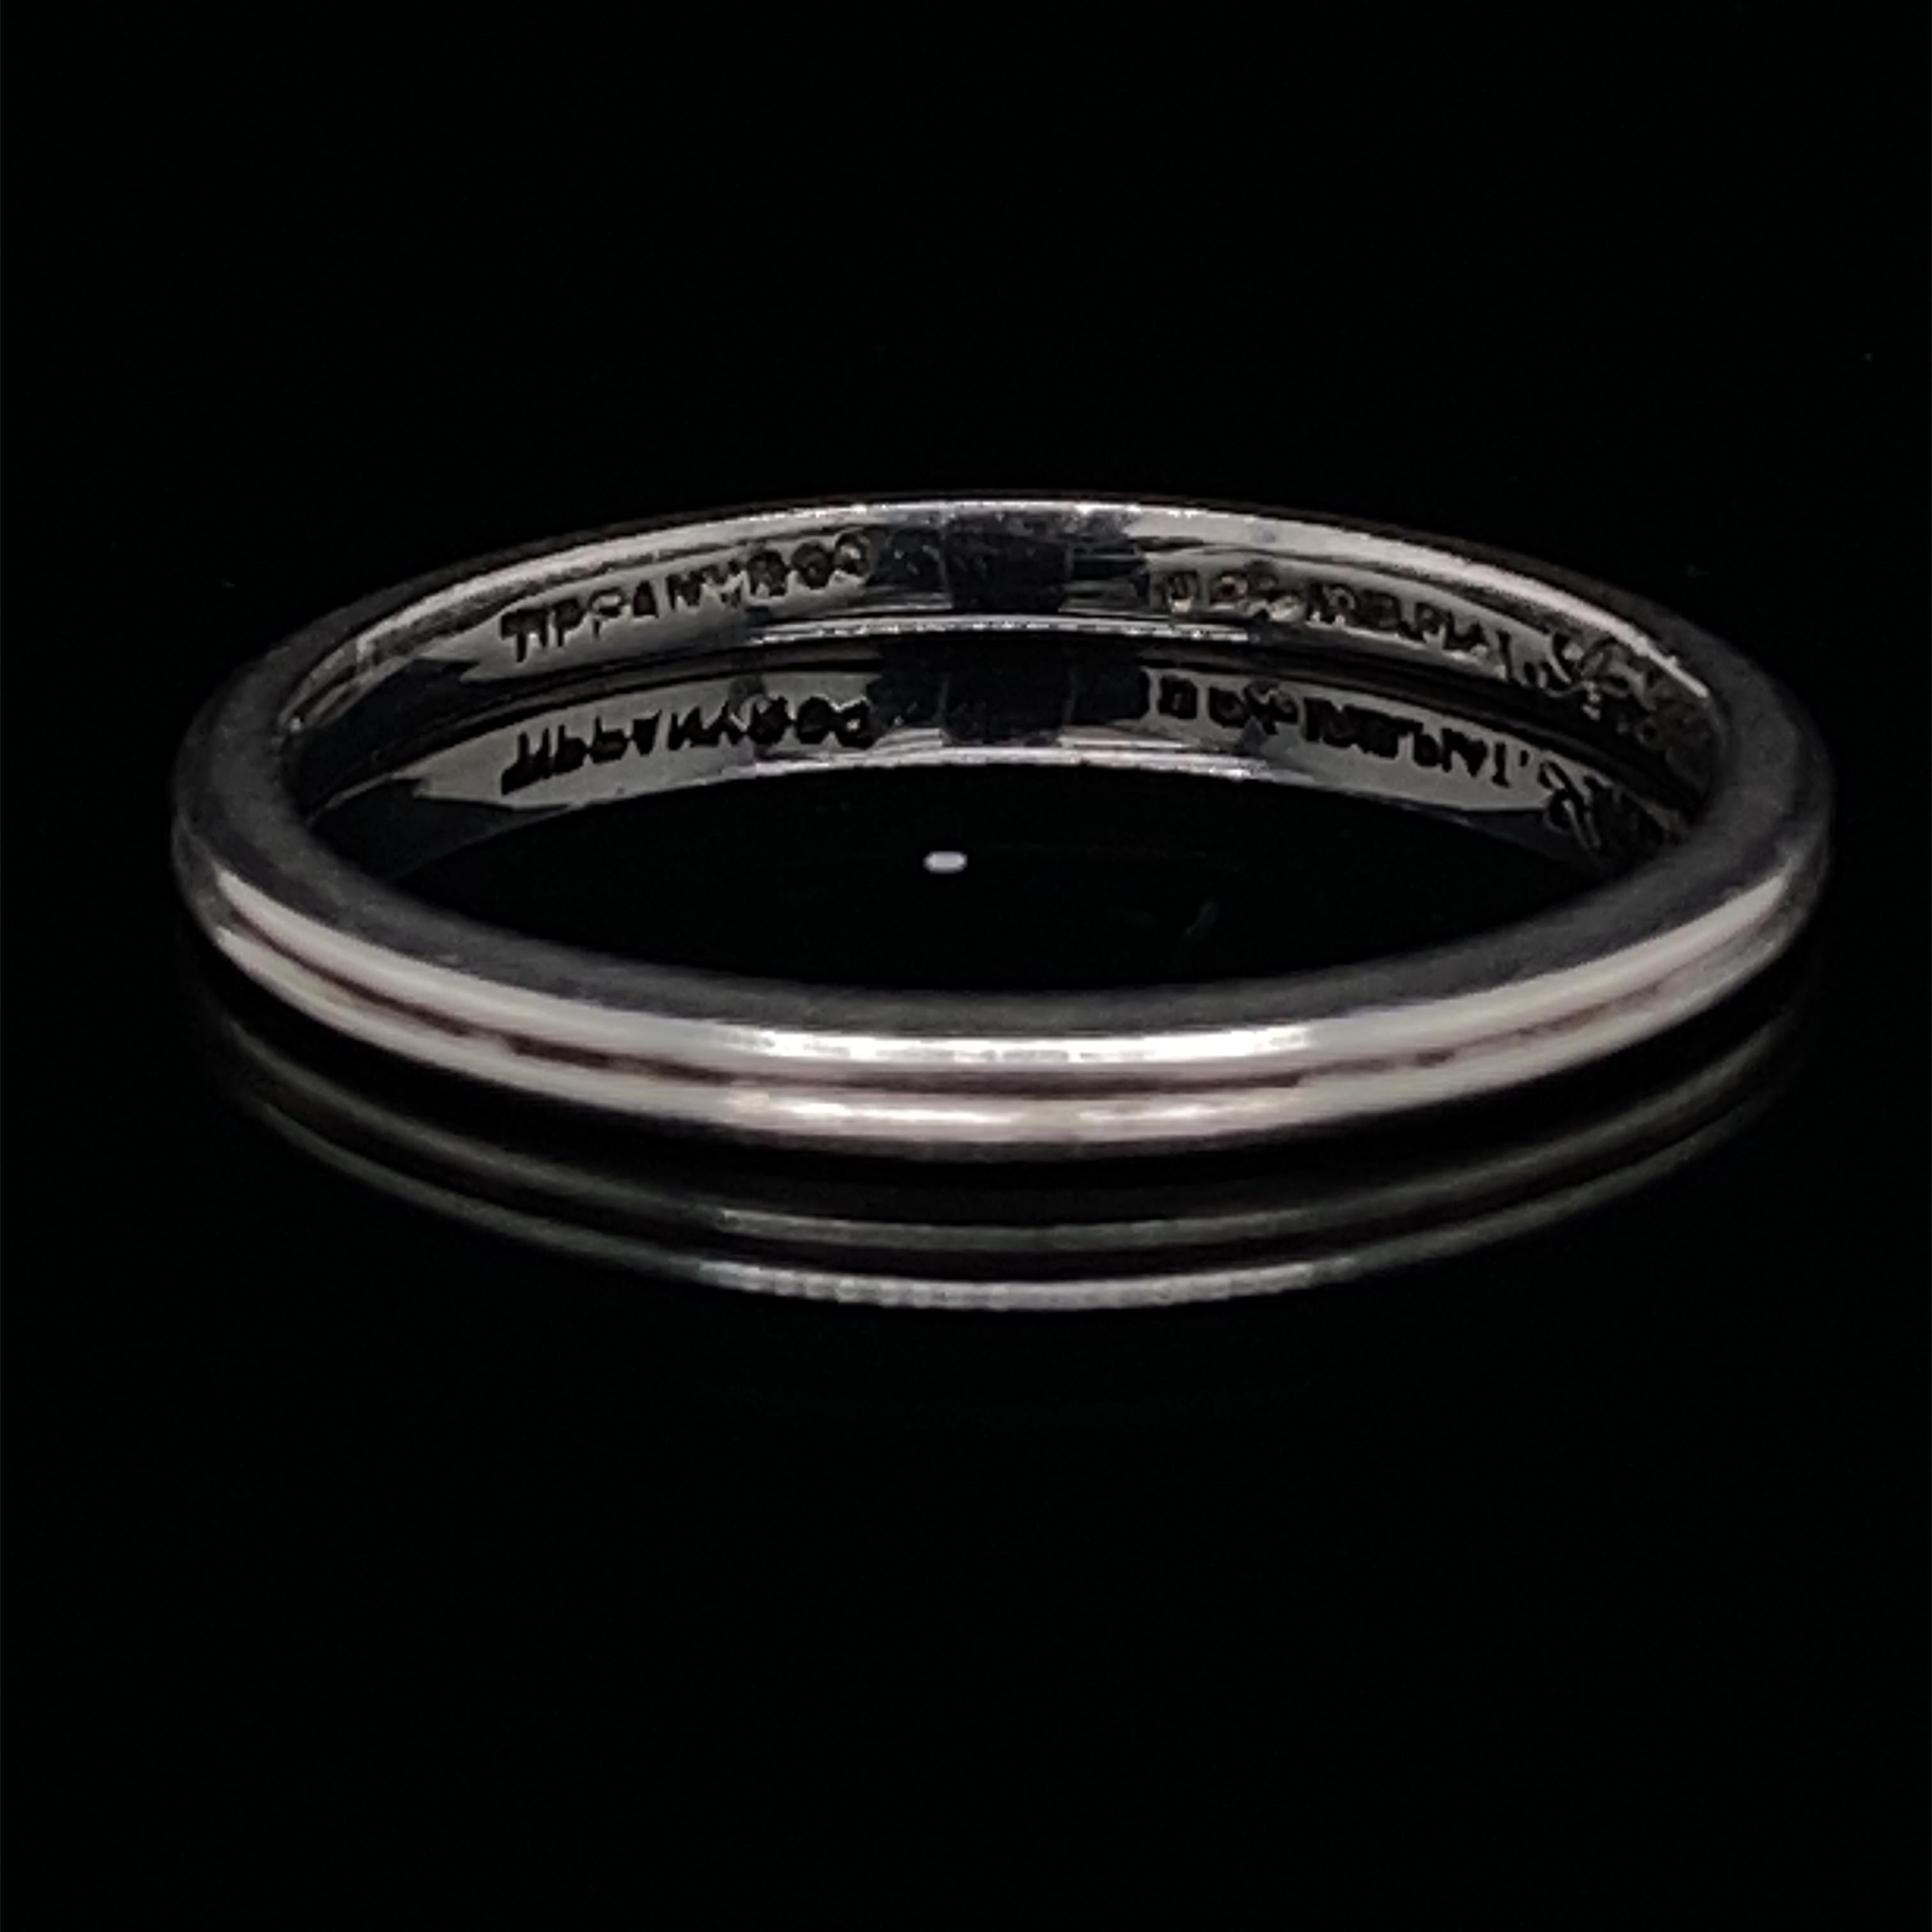 A vintage Tiffany & Co. platinum wedding band, circa 1947.

This elegant fine band has a deep ridged detail to its centre and comprises of platinum and iridium, which was typical for rings of this time period from the United States.

Signed 'TIFFANY